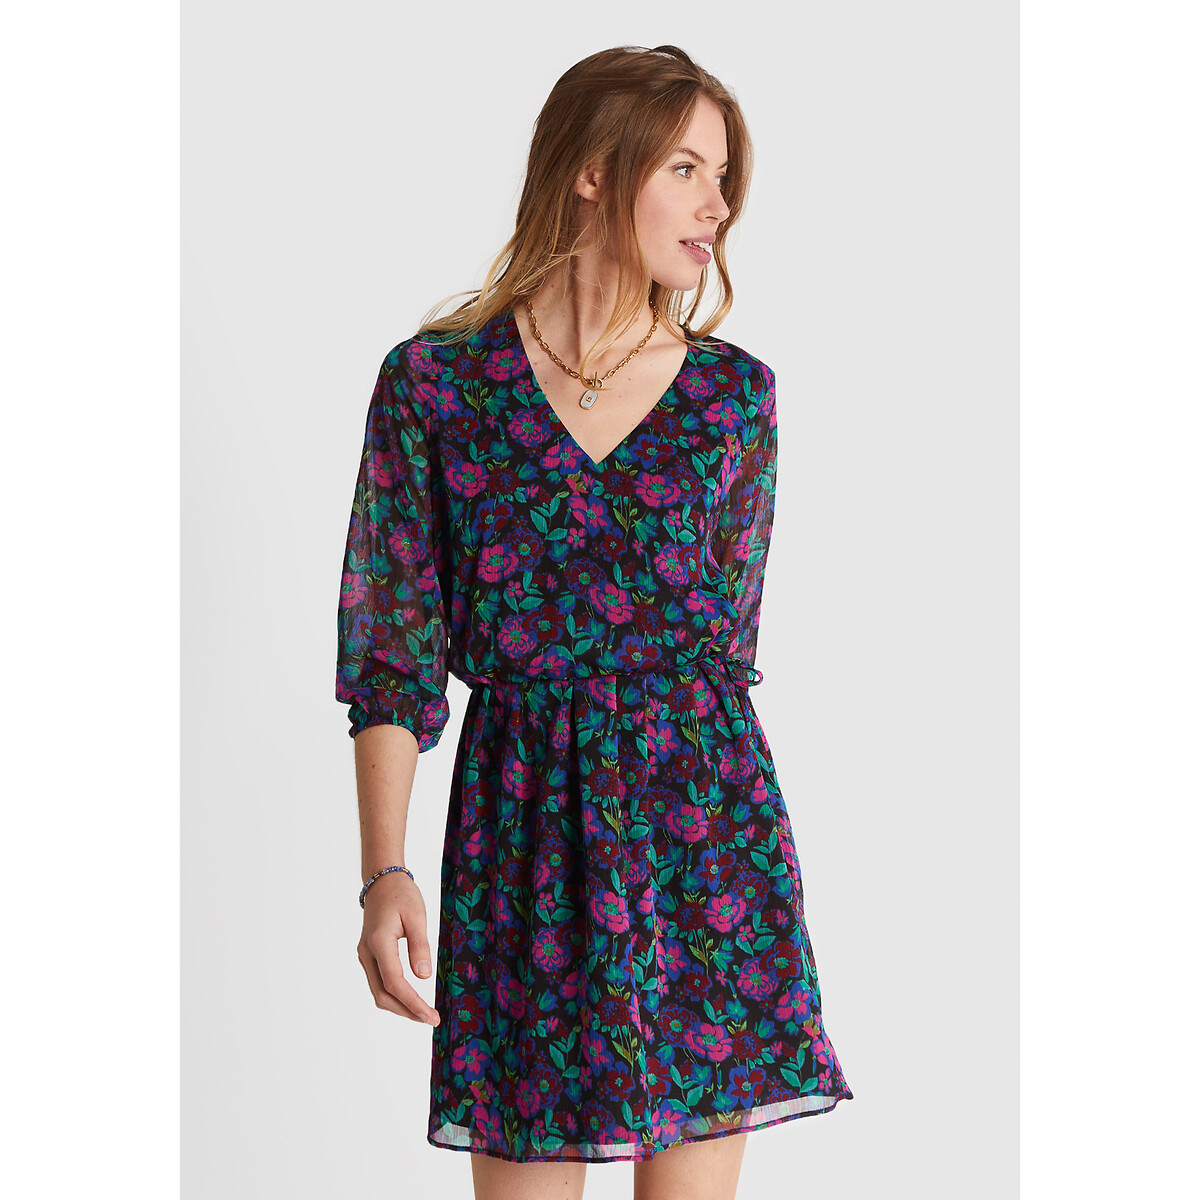 Floral Print Full Dress with V-Neck and Long Sleeves